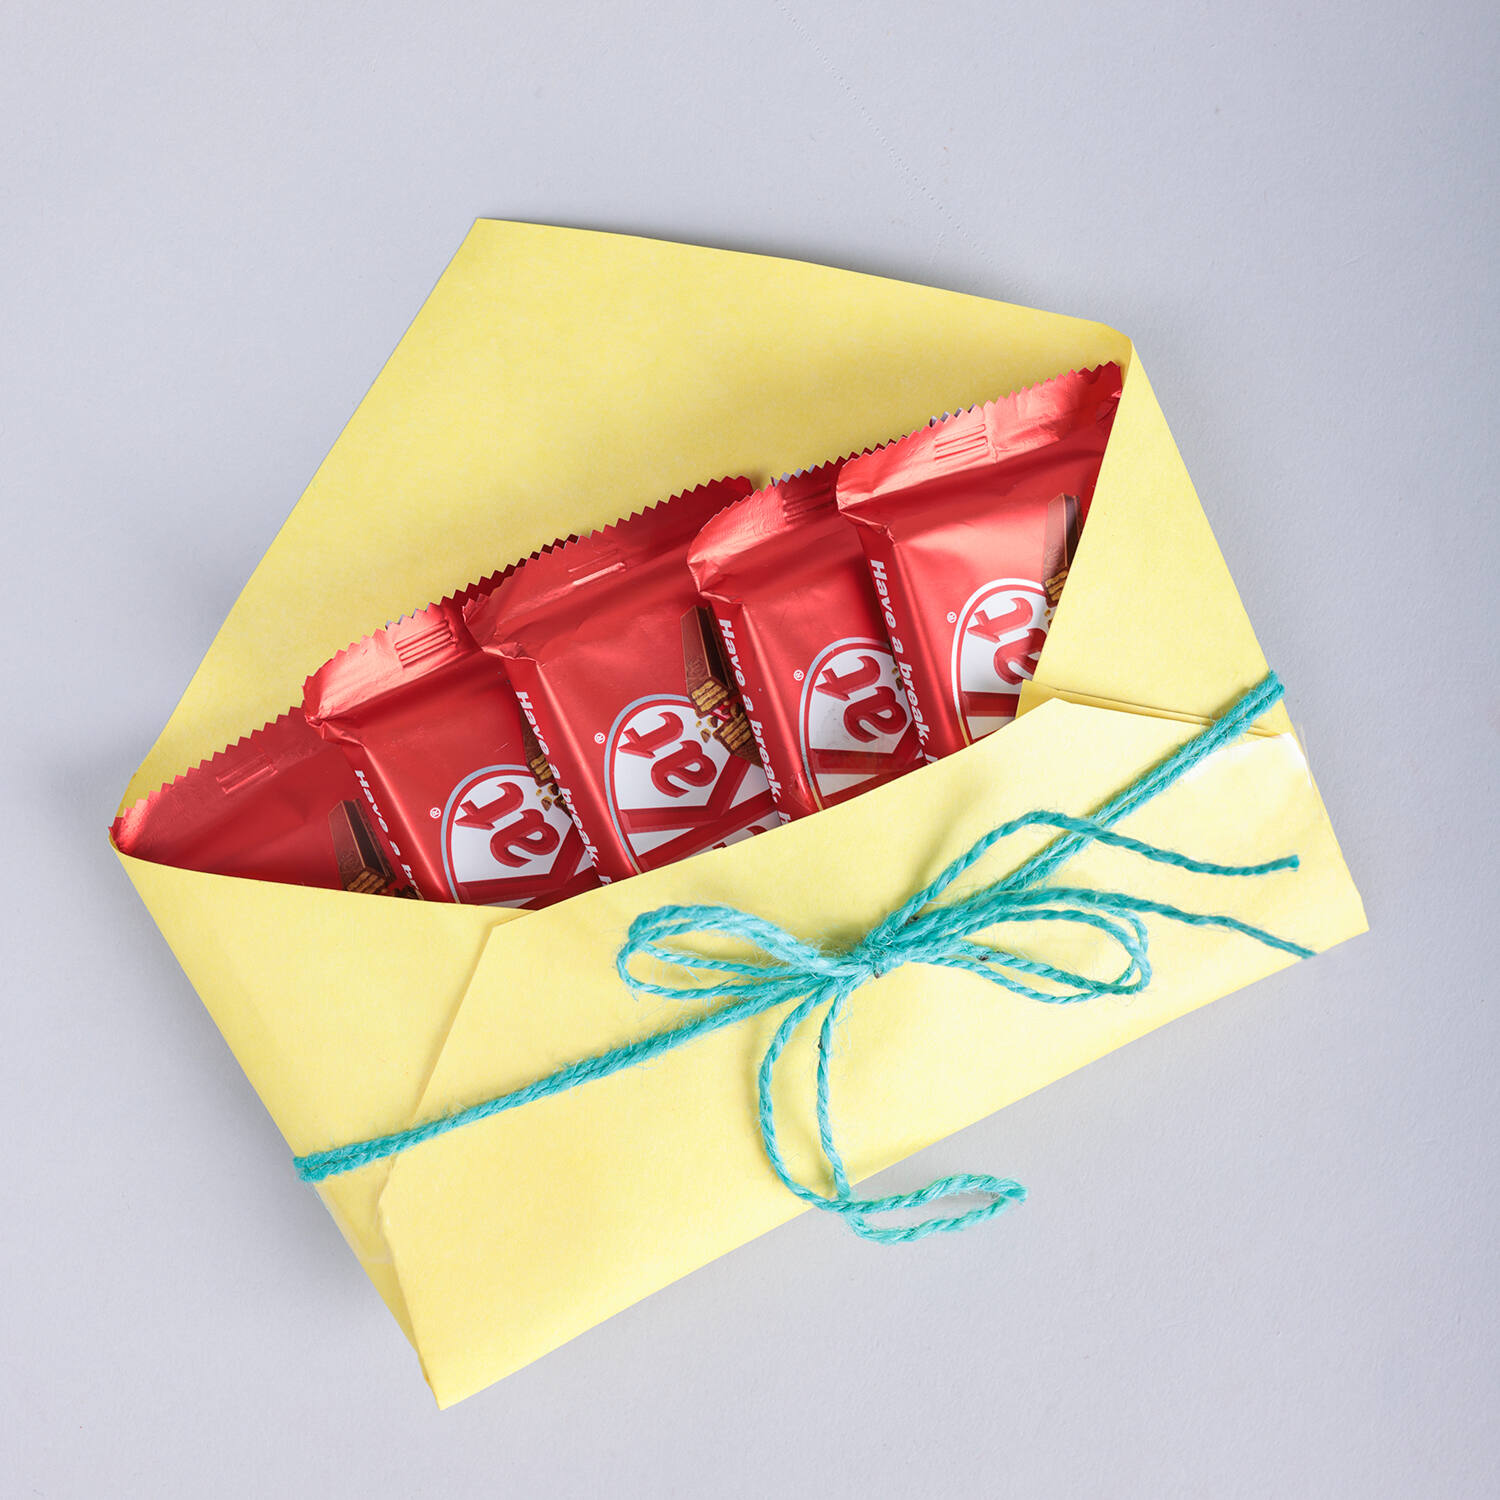 Share more than 140 kitkat chocolate gift latest